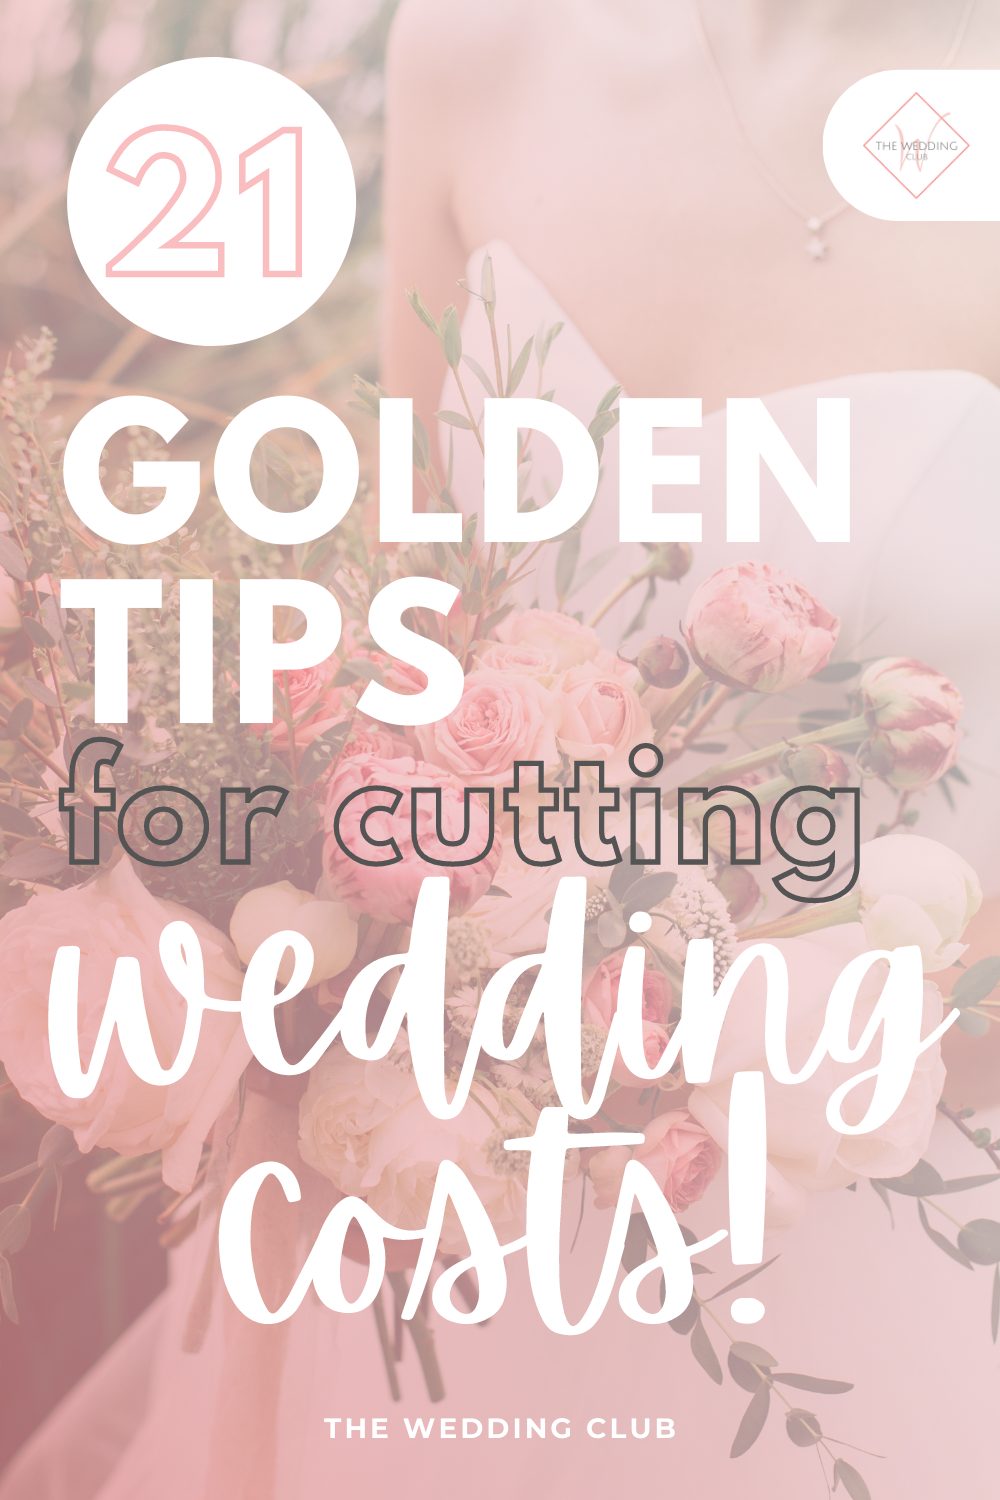 21 Golden tips for cutting wedding costs-PIN